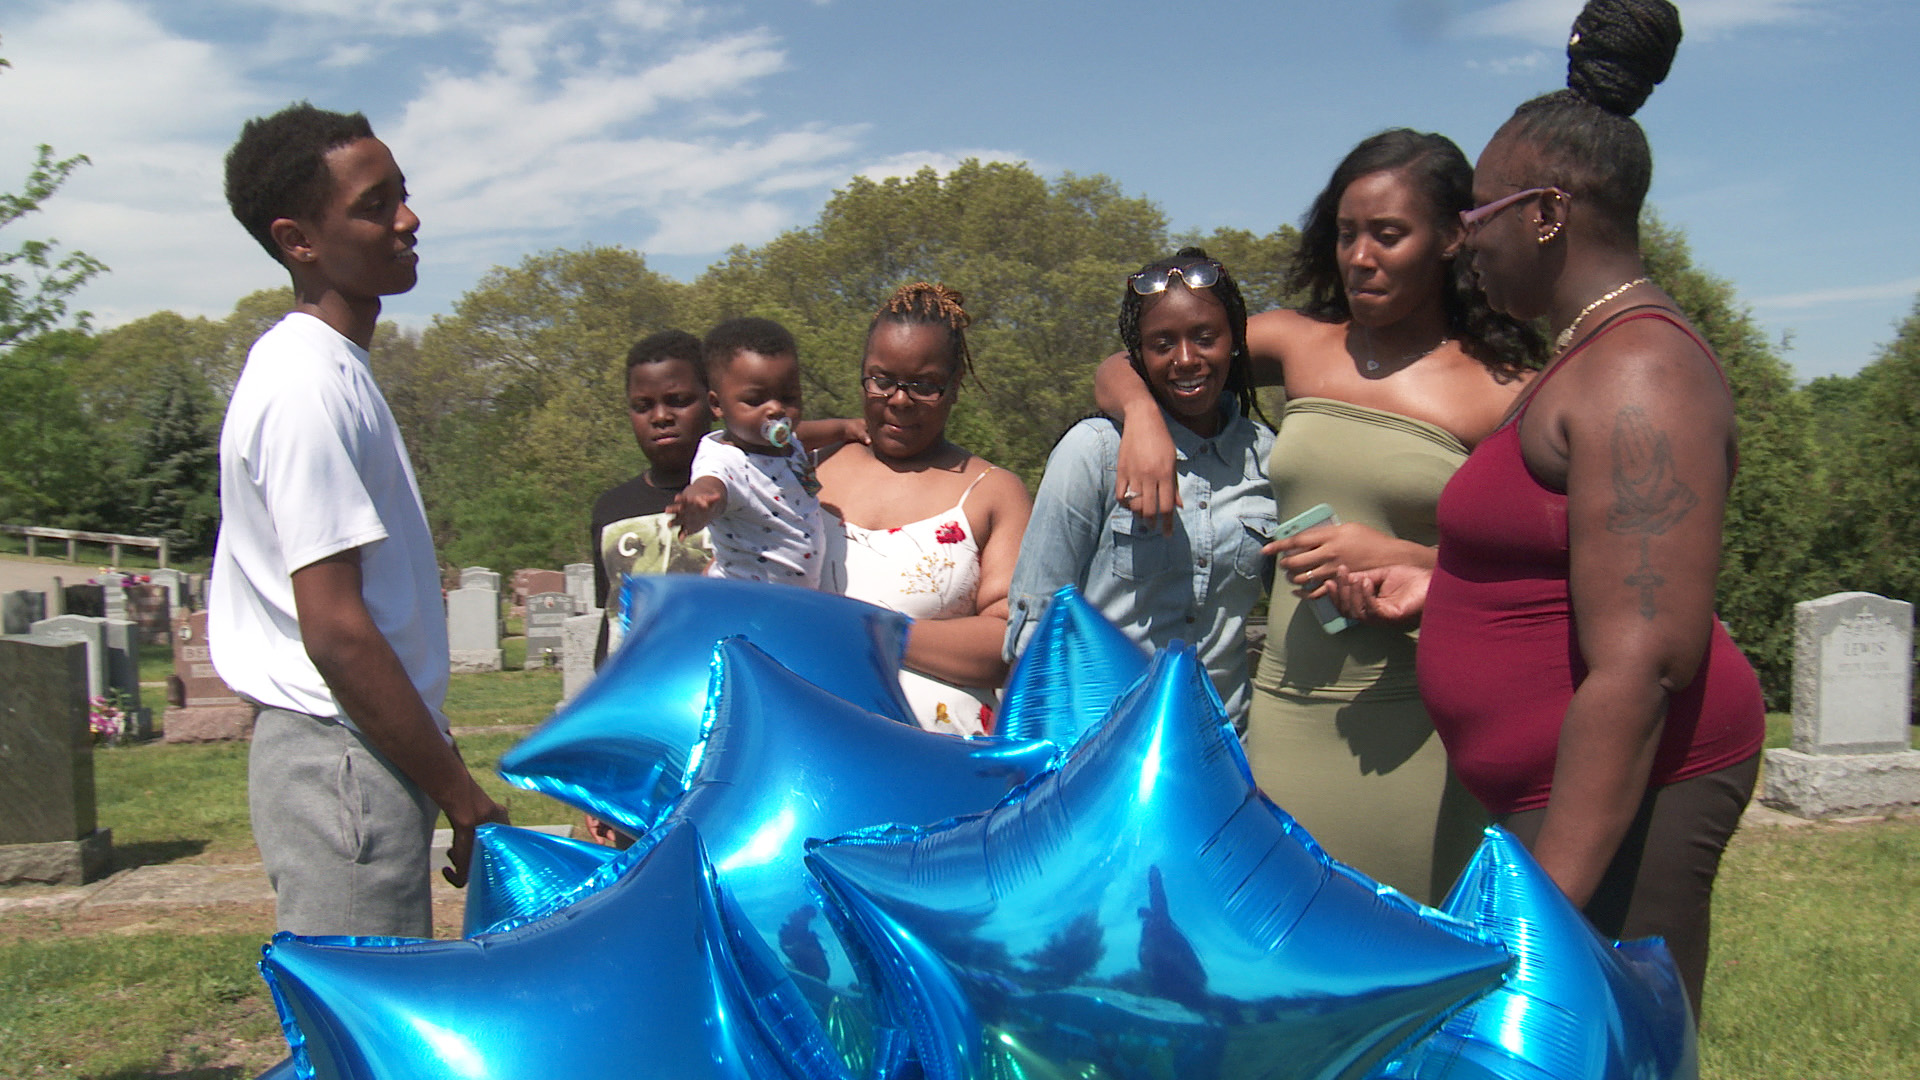 Clarissa Turner and family celebrate her son’s birthday at his graveside with blue star balloons